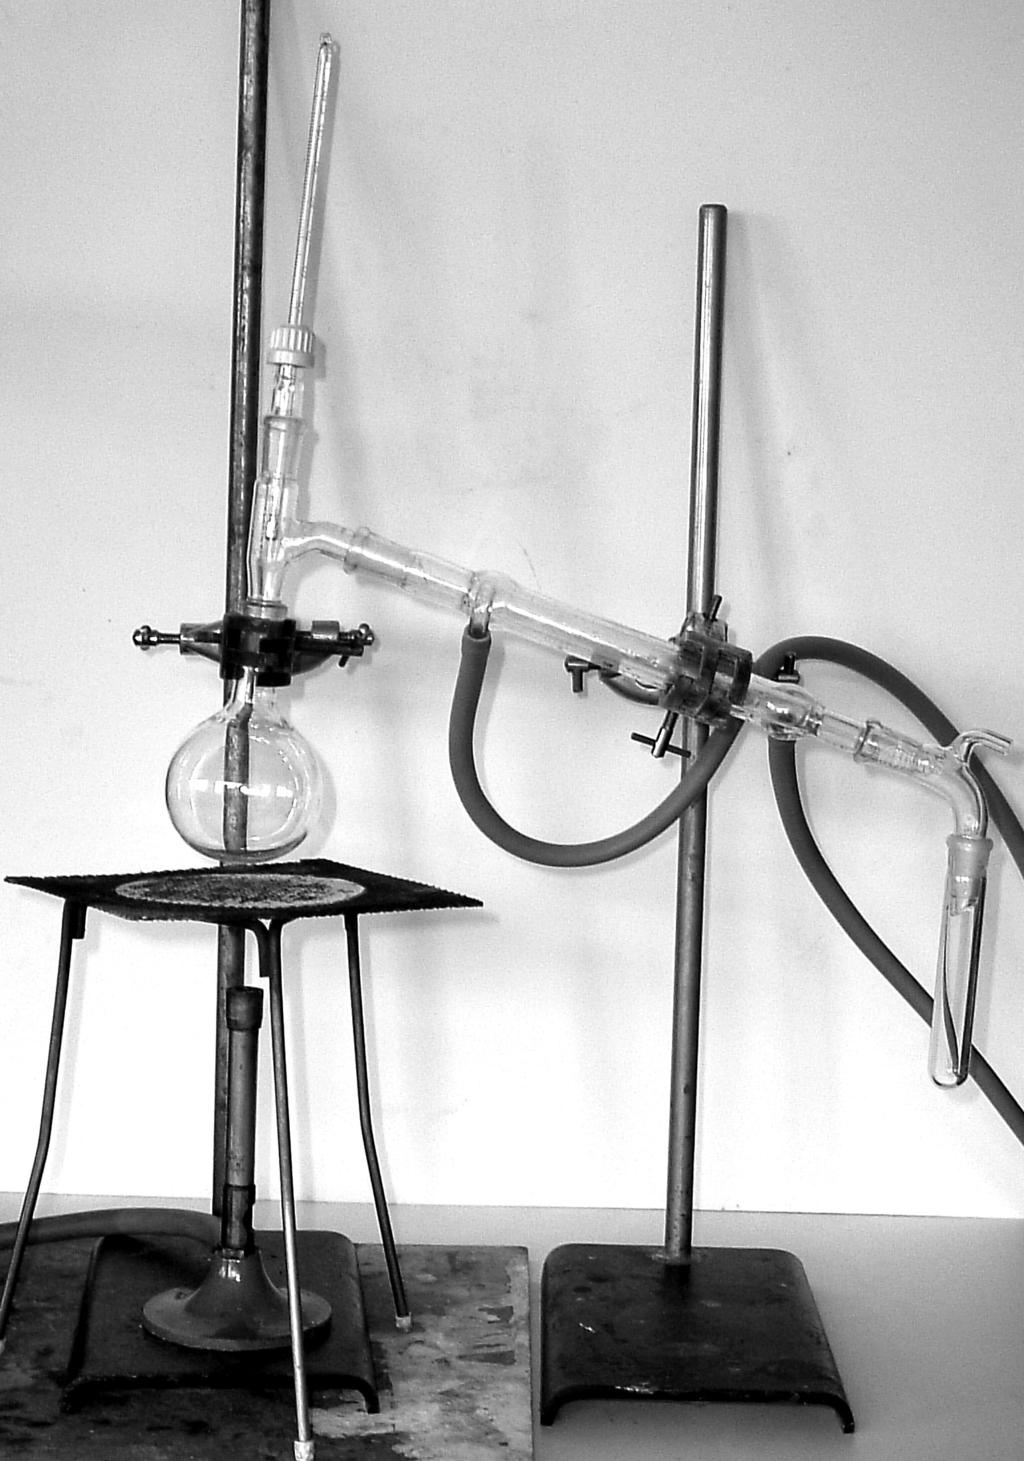 1. The picture shows apparatus used to